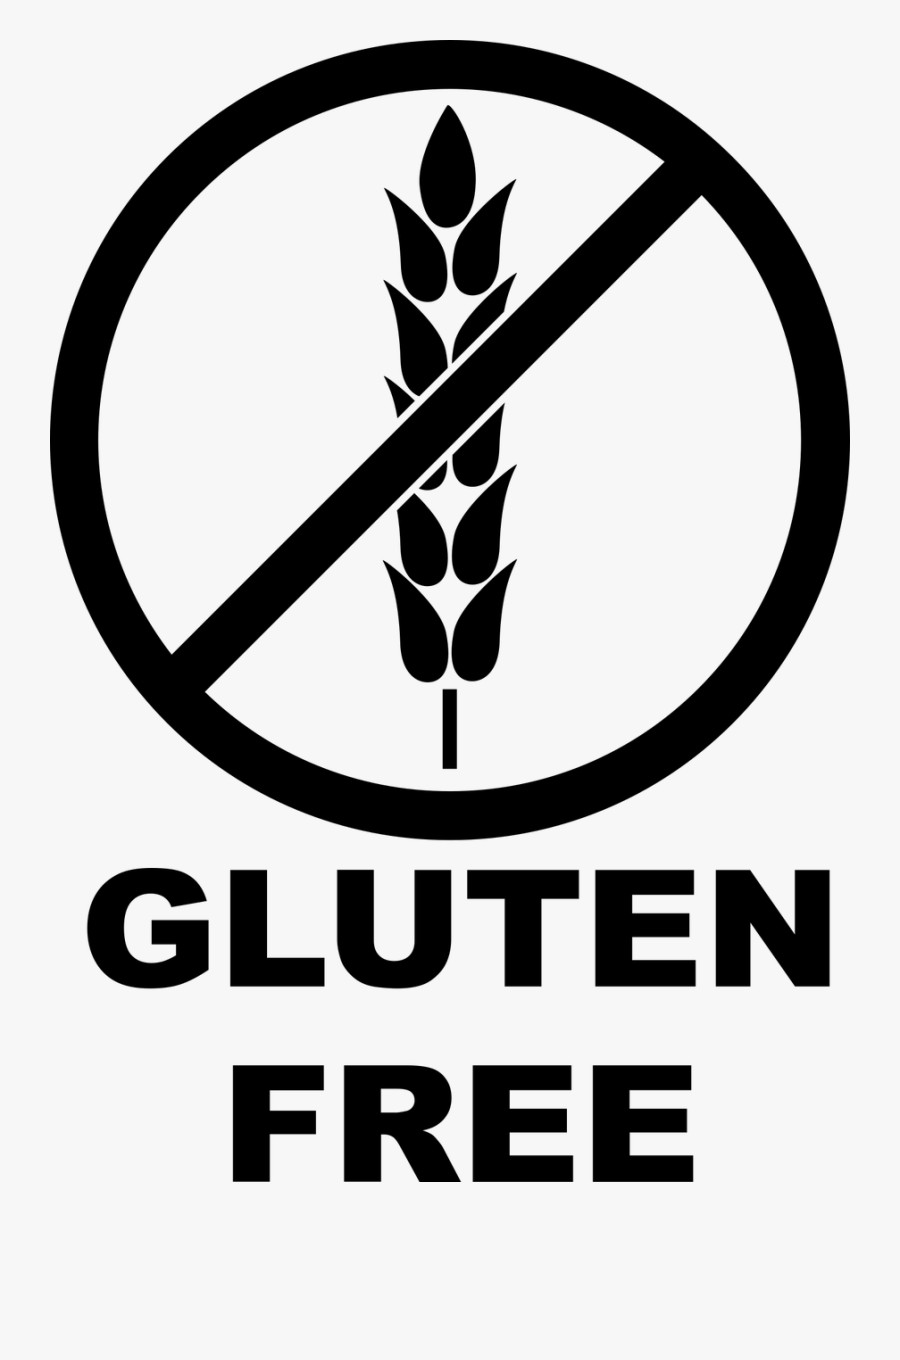 Why Gluten Is Bad For You - Transparent Gluten Free Symbol, Transparent Clipart